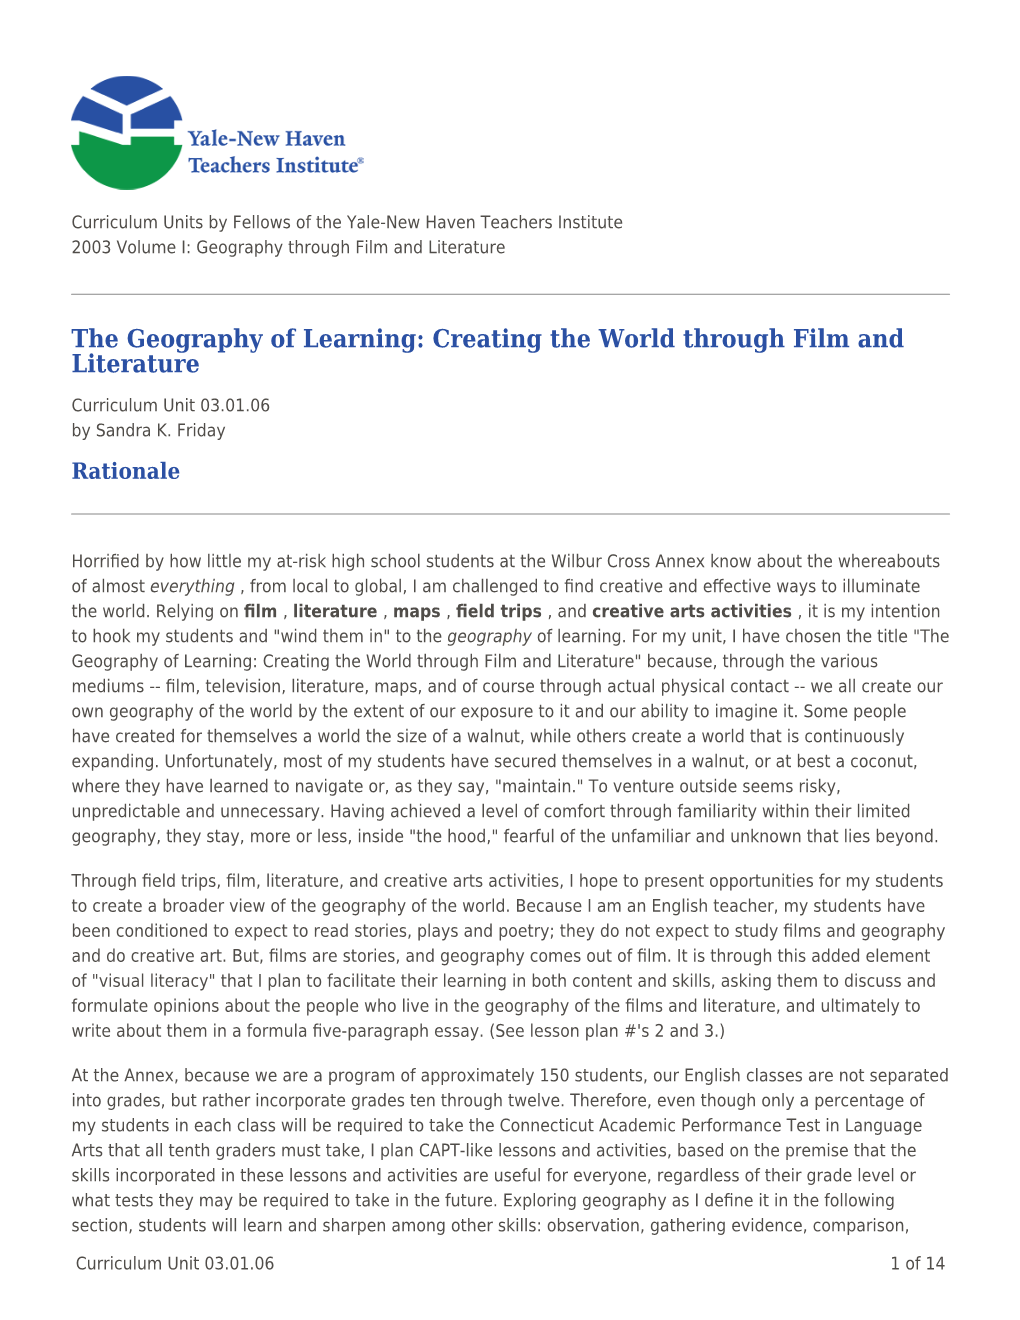 The Geography of Learning: Creating the World Through Film and Literature